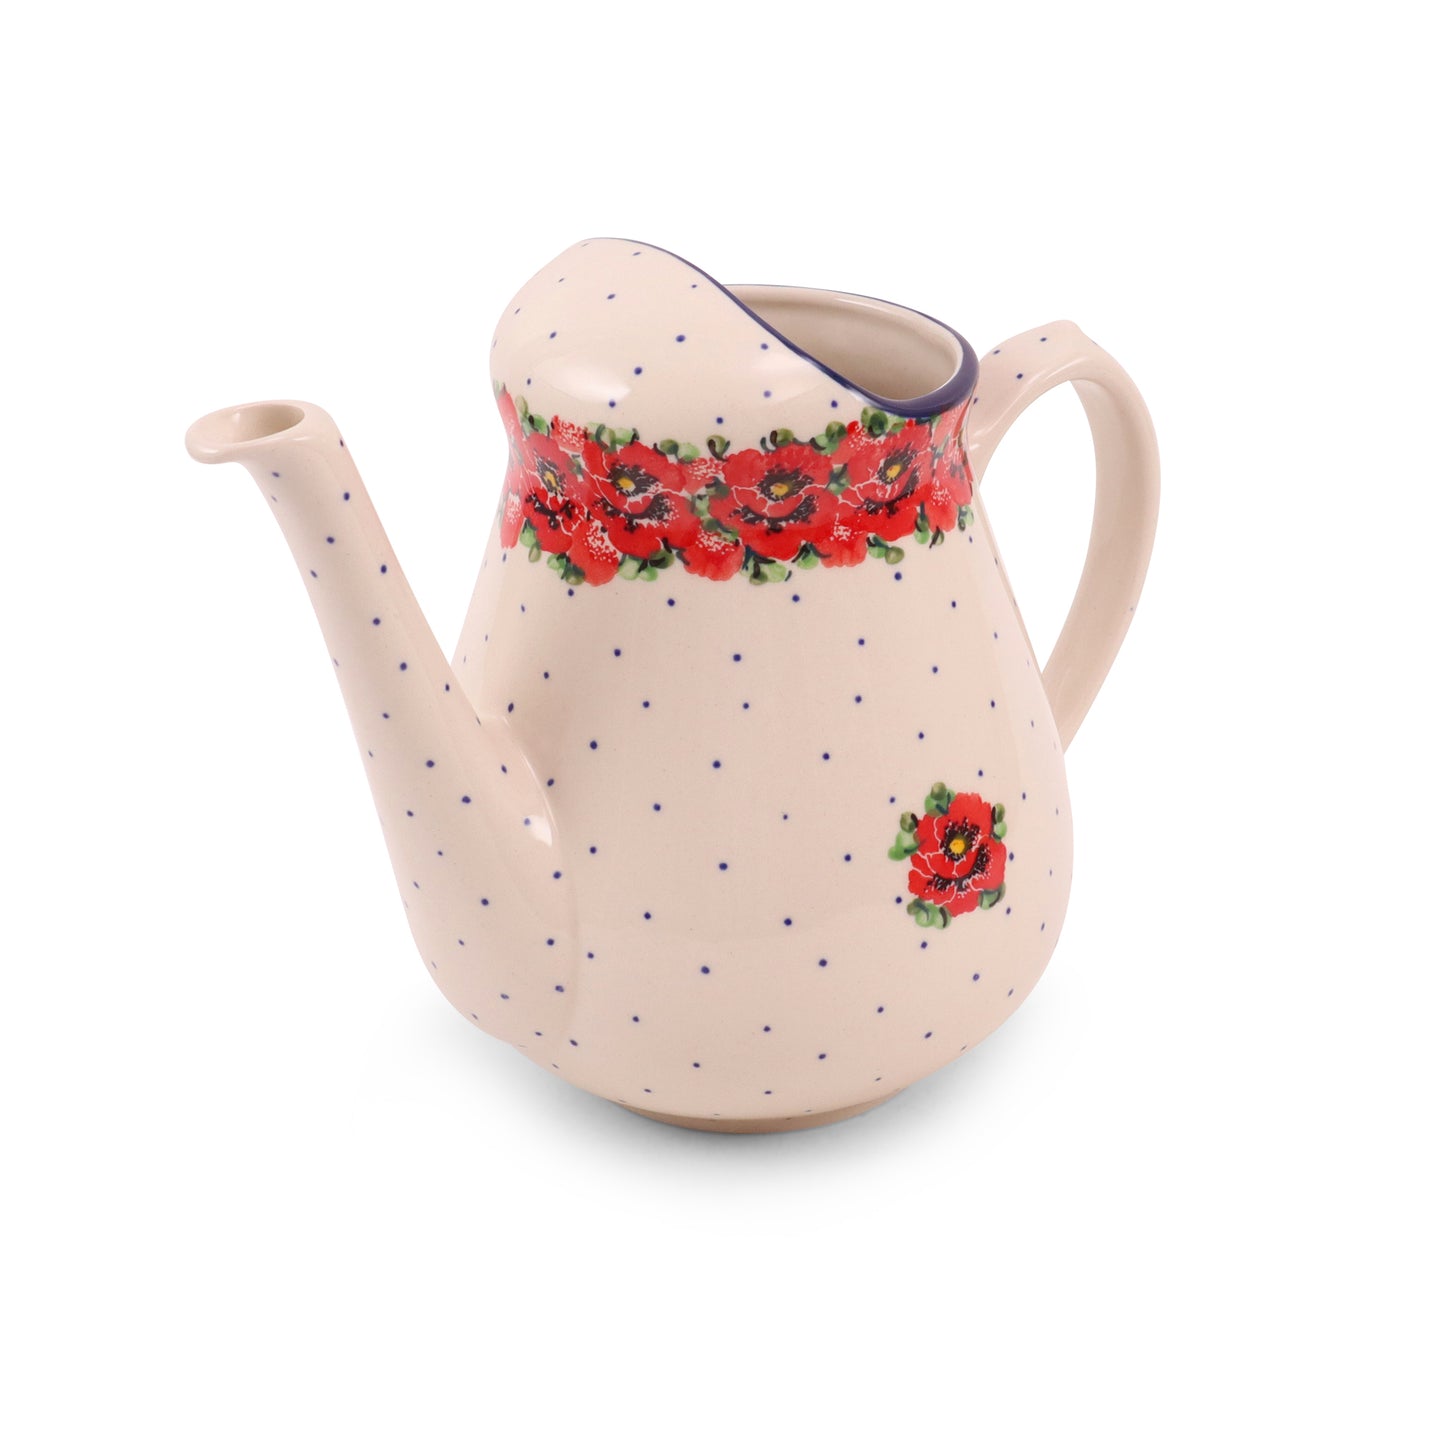 2L Watering Can. Pattern: Surroundings Inspiration